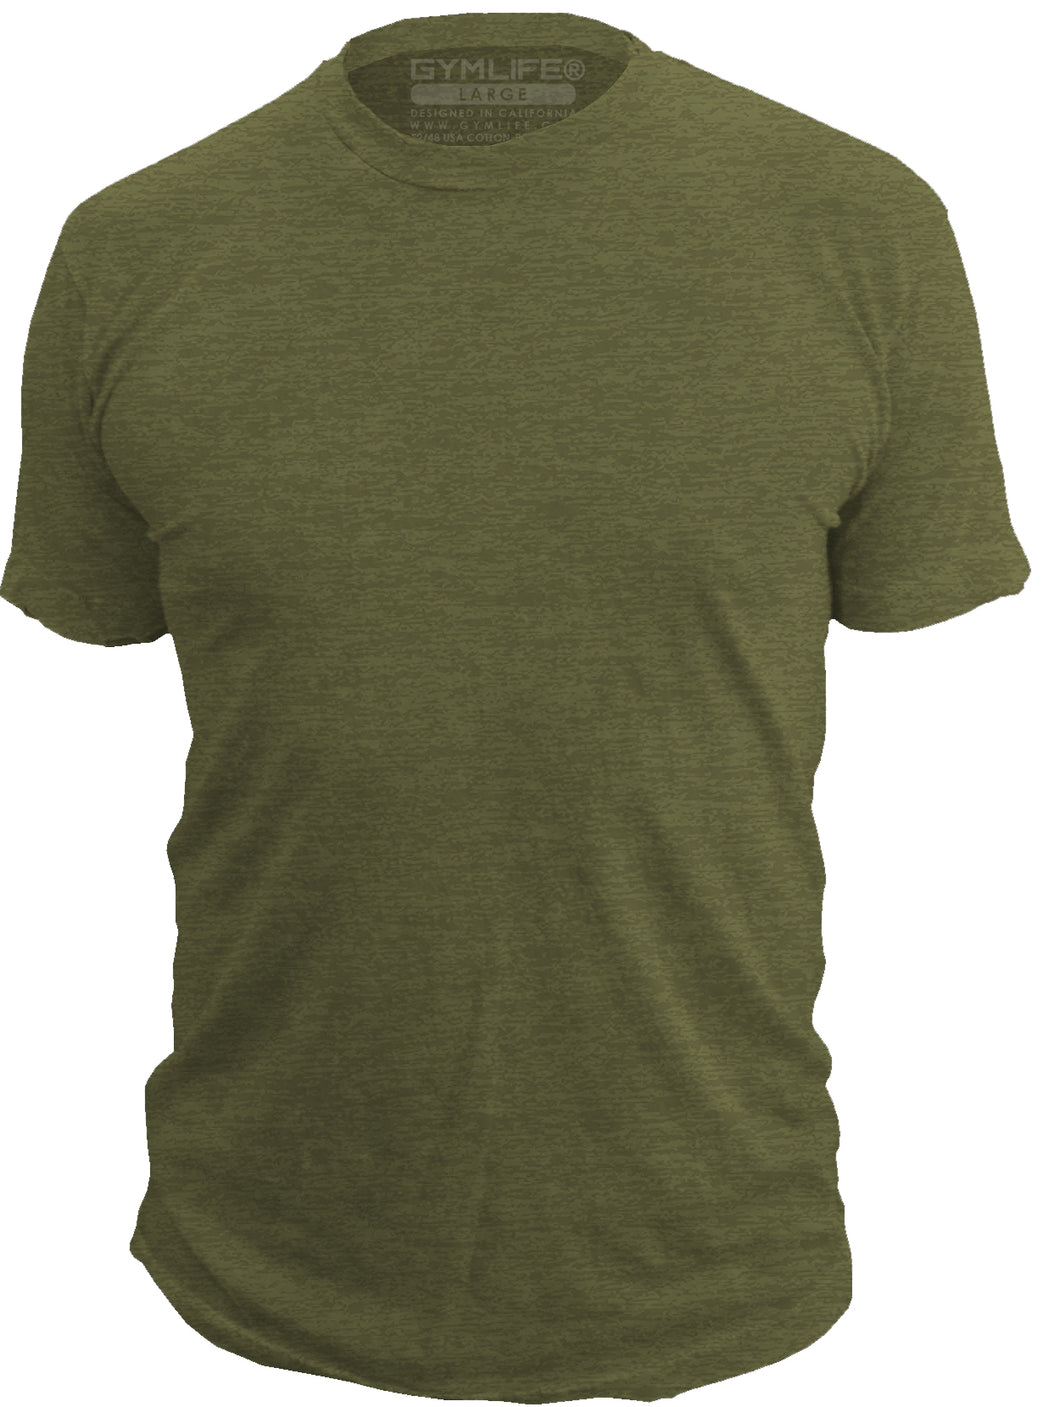 GYM LIFE - BLANK - Mens Athletic 52/48 Premium T-Shirt, Made of USA, Olive Heather